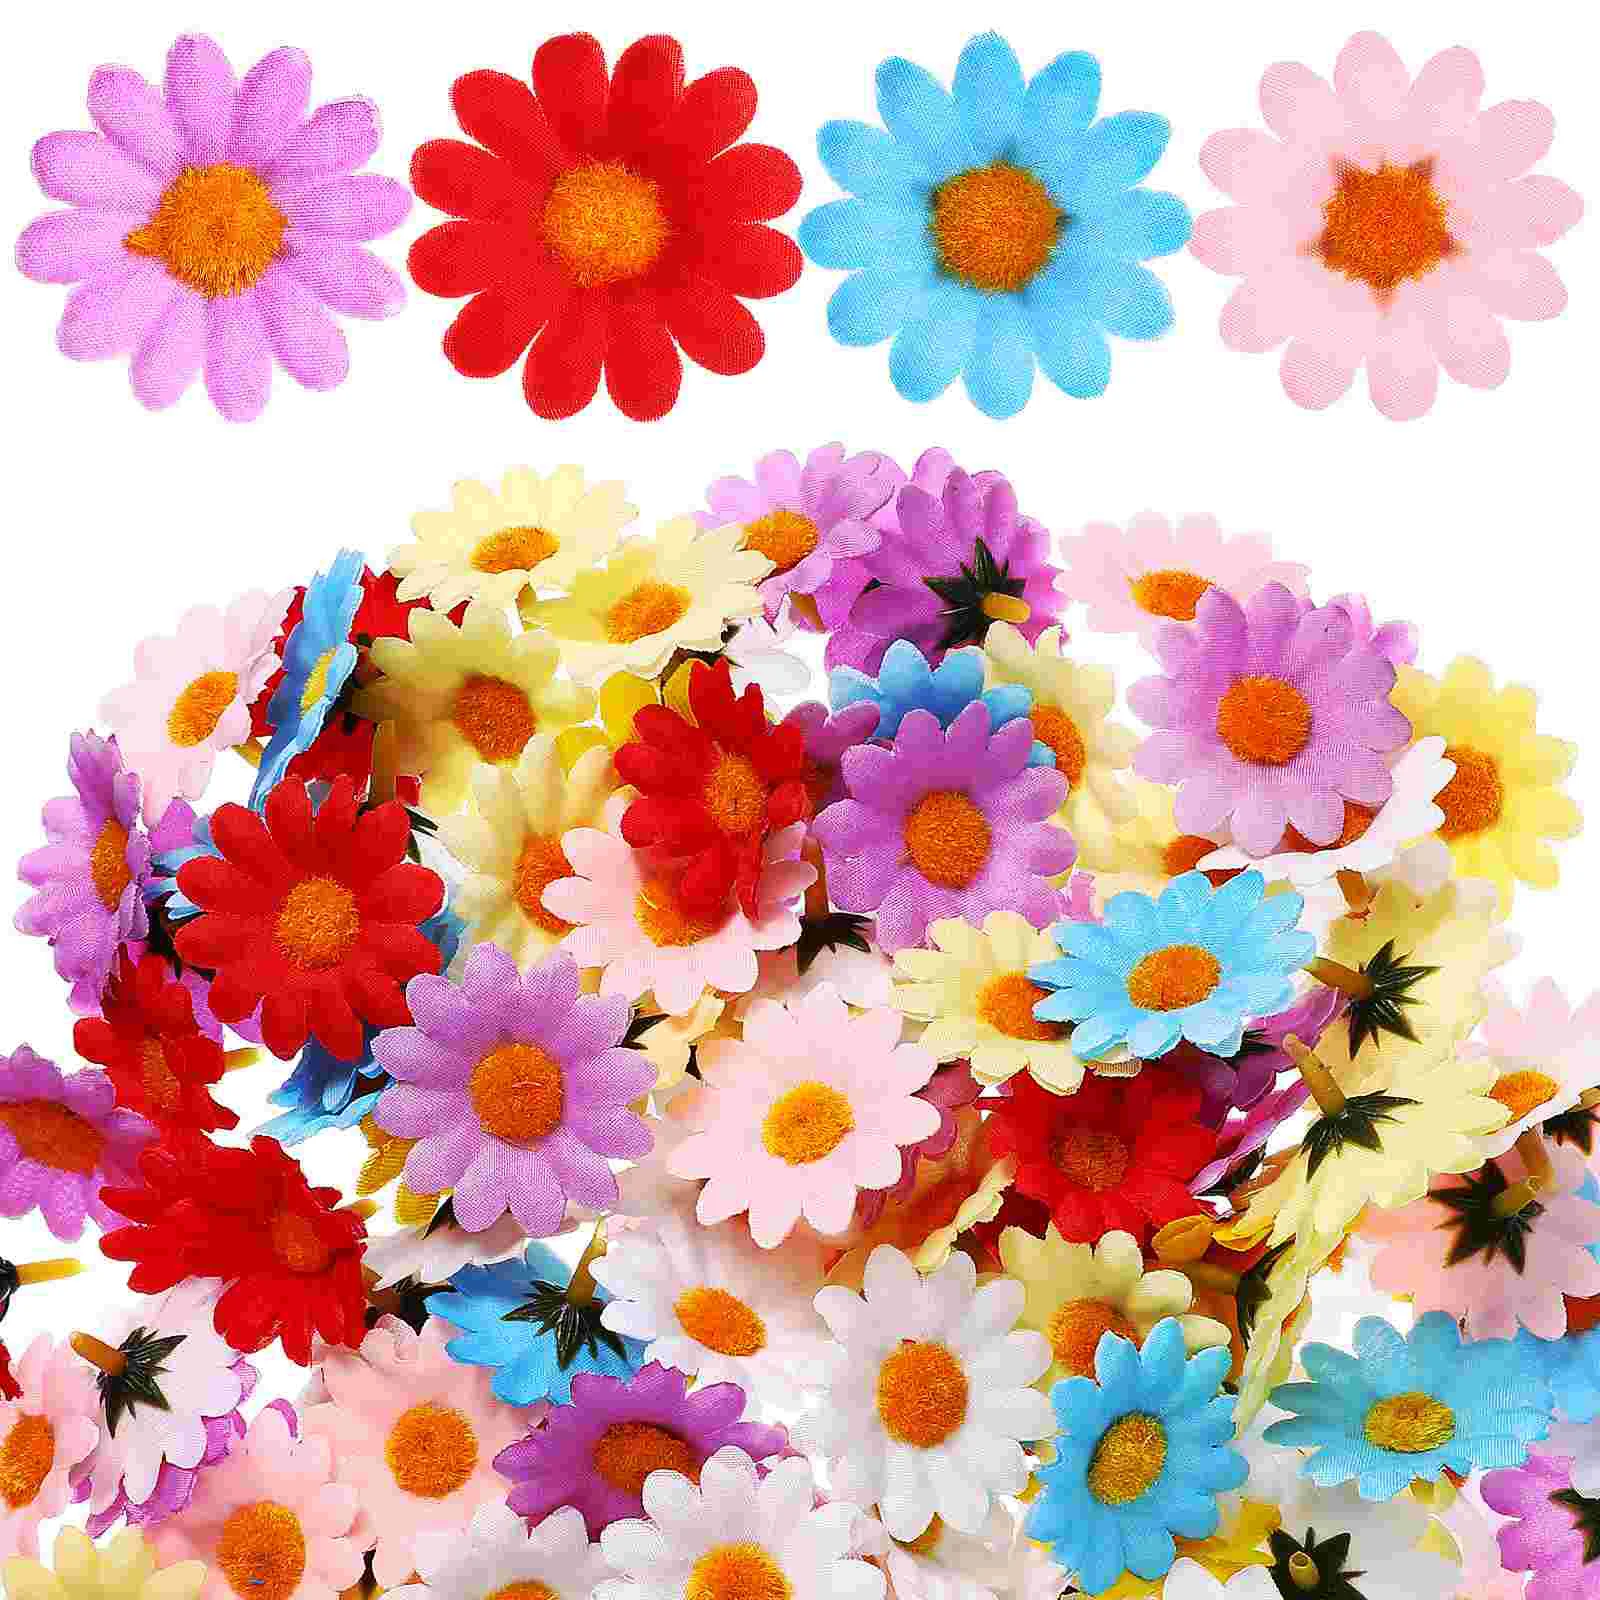 150 Pcs Craft Materials Small Realistic Artificial Sunflower Heads Artificial Daisy Flower Heads  Craft Flowers